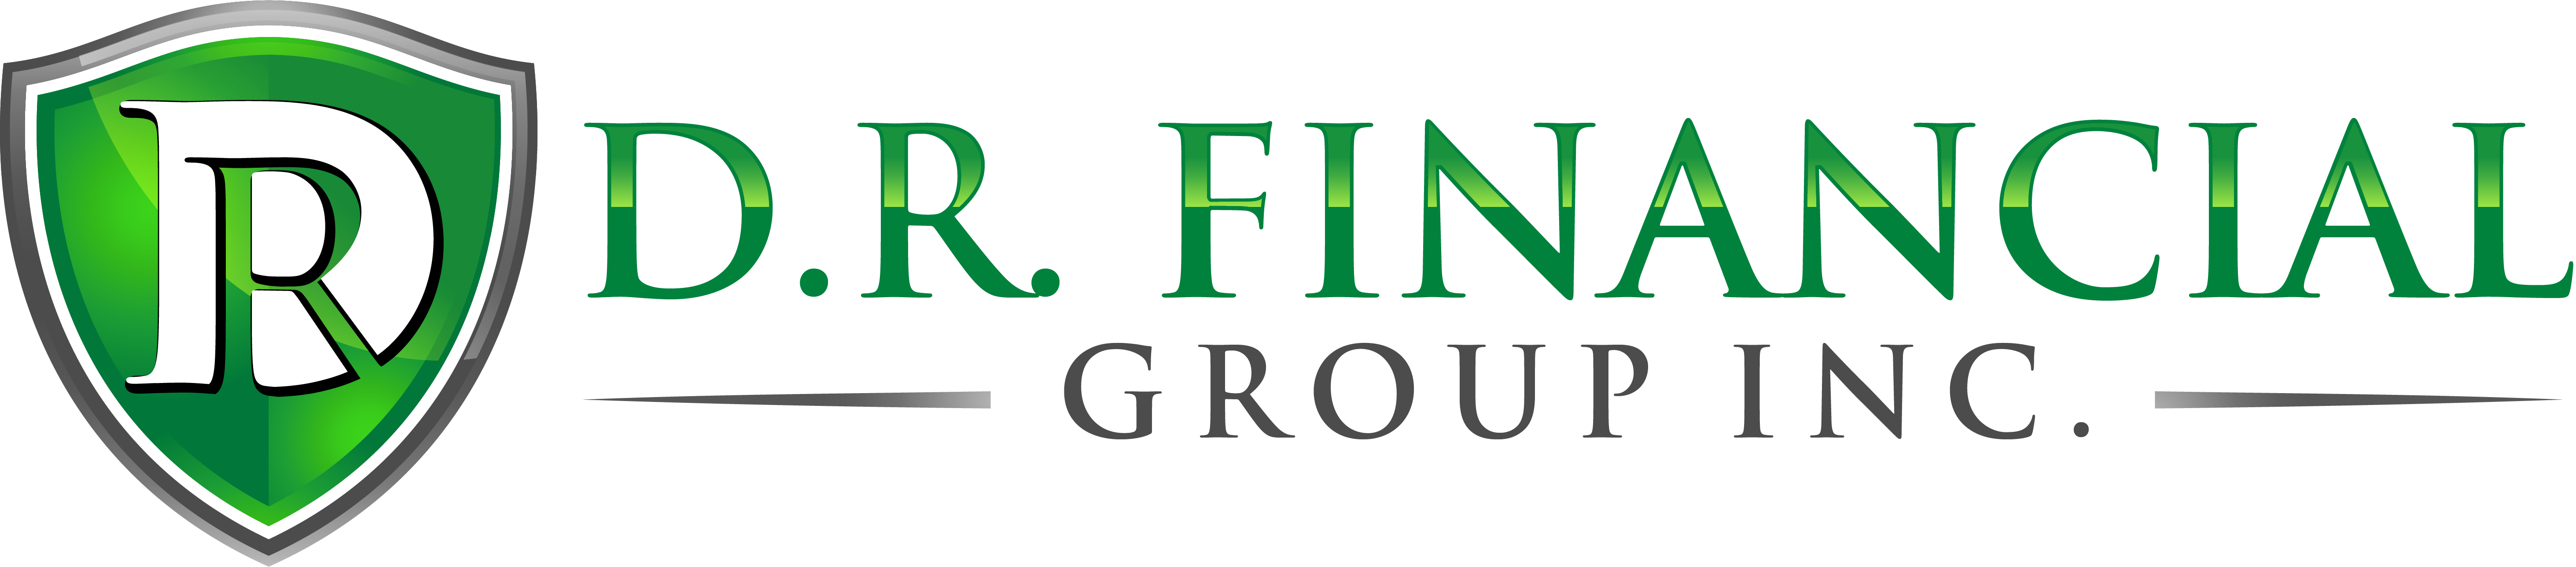 Dr financial group inc.